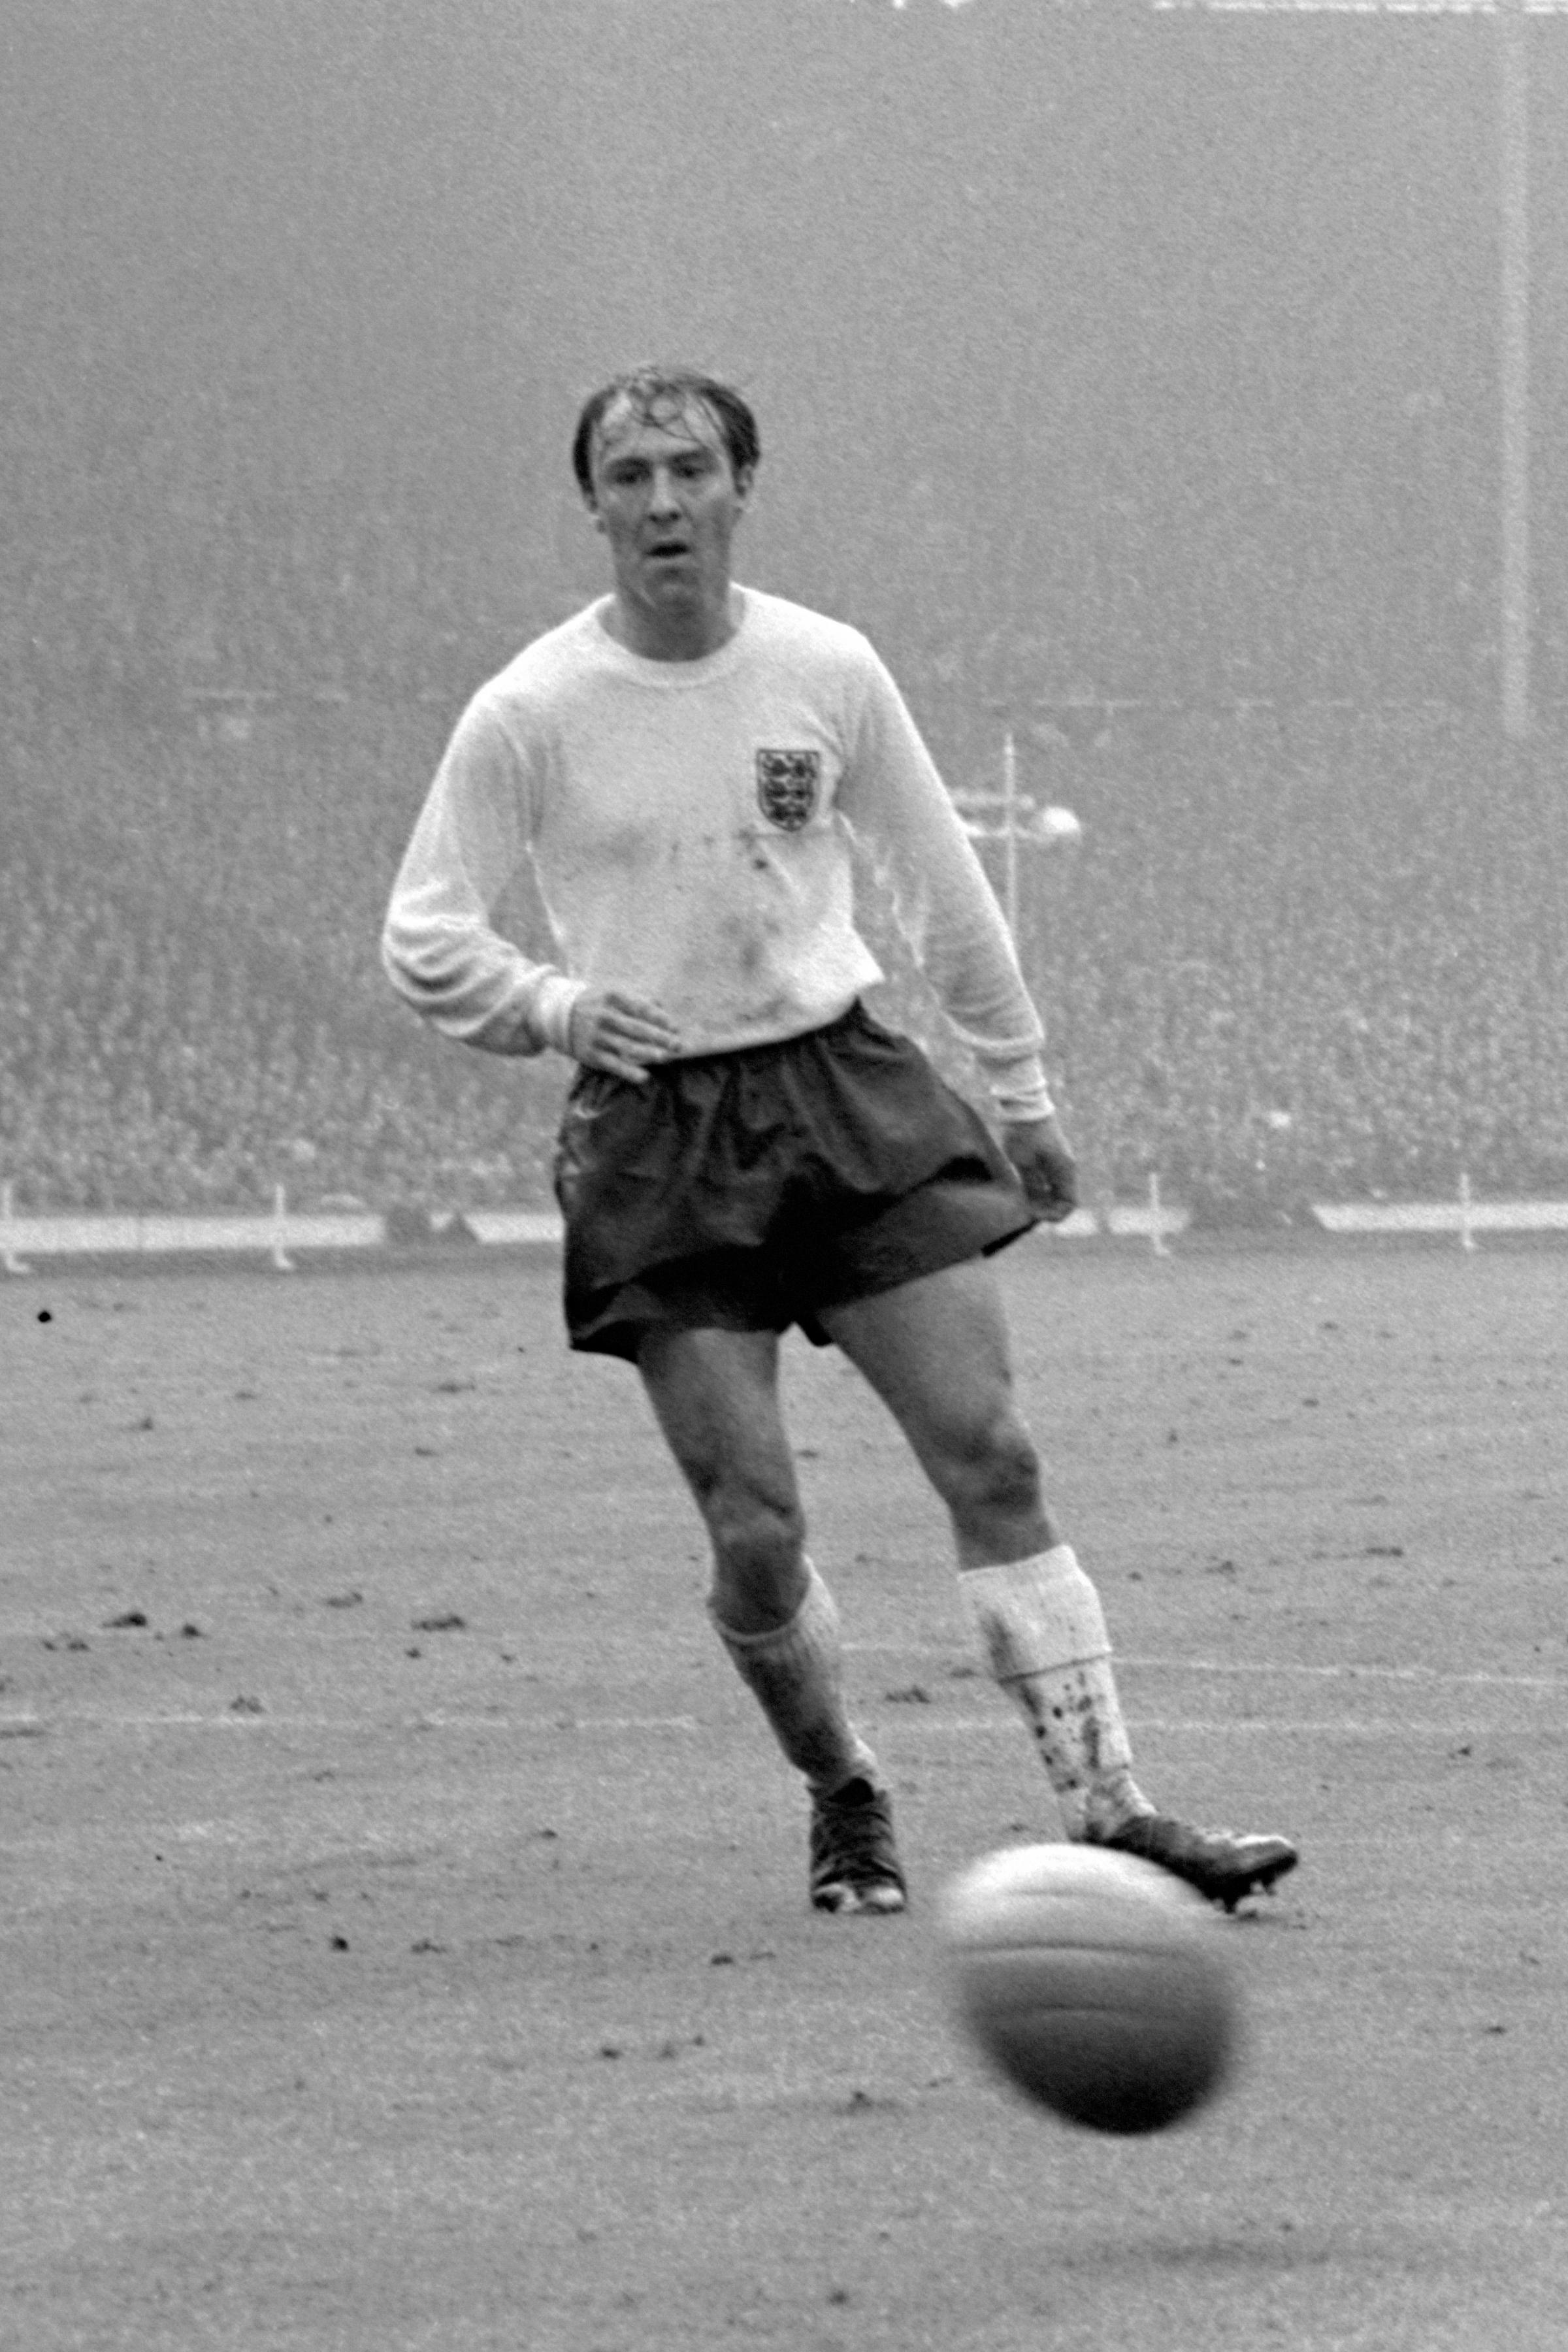 Jimmy greaves